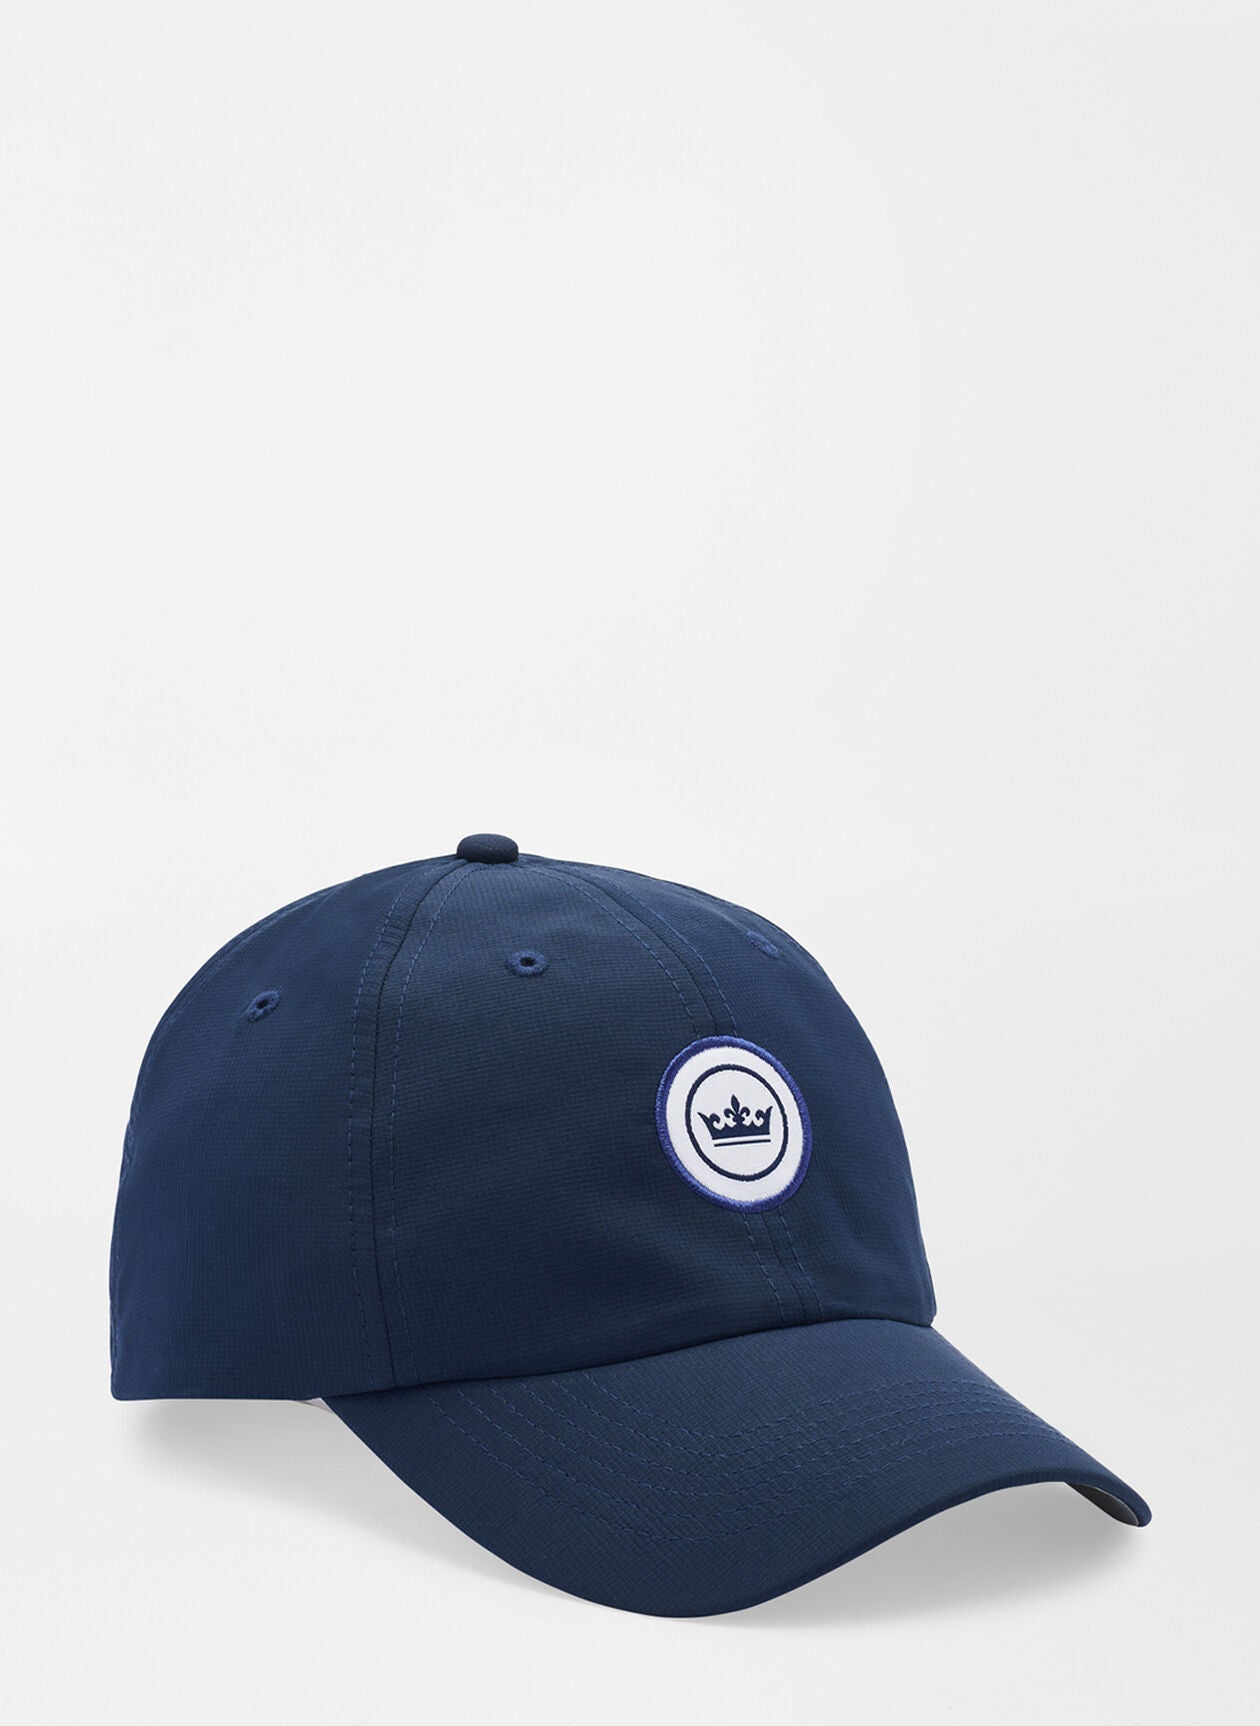 Crown Seal Performance Hat- Three Colors